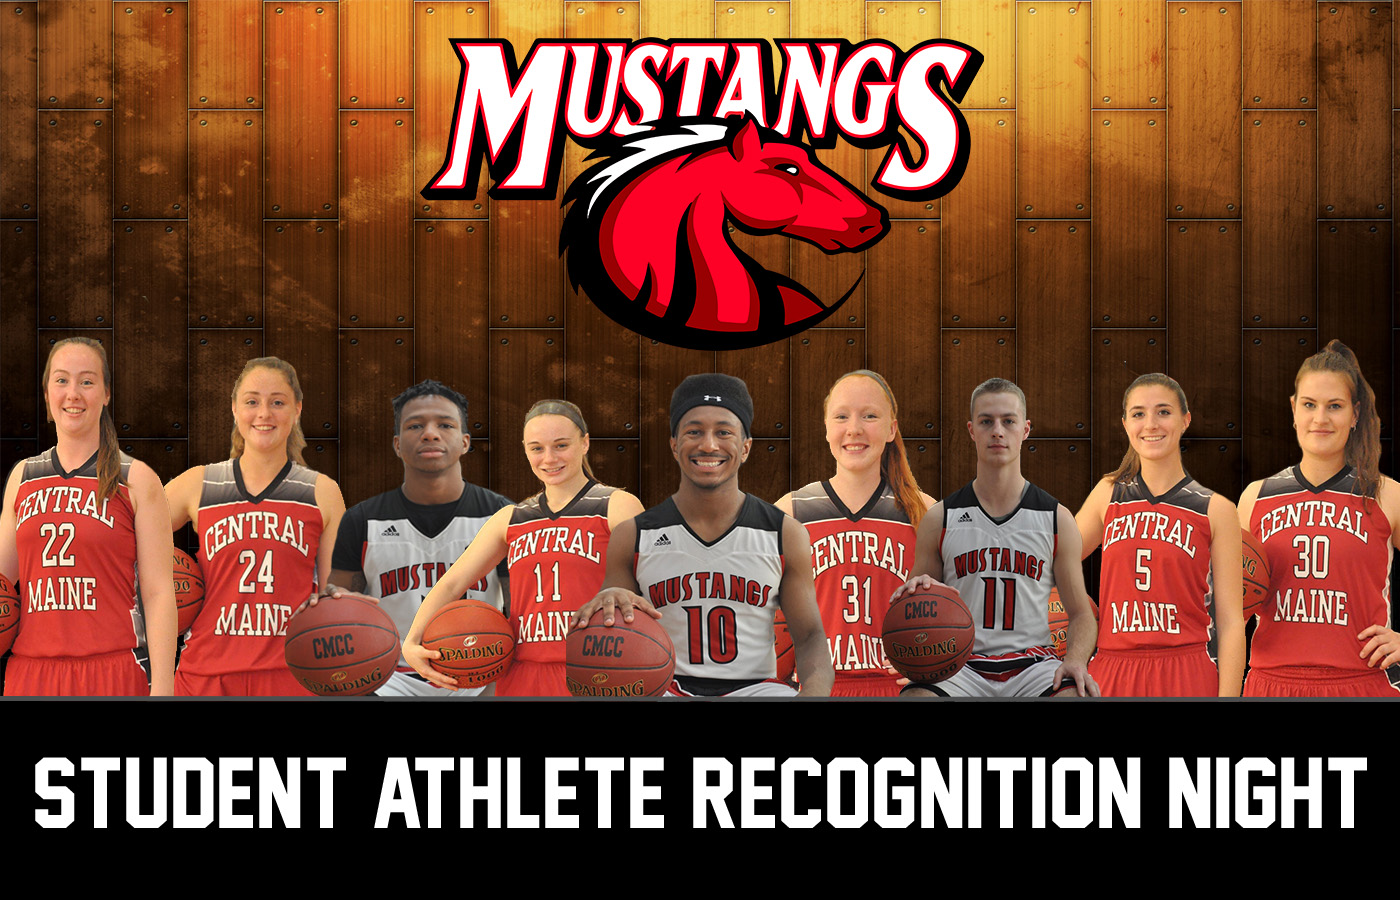 Student-Athlete Recognition Night Scheduled for this evening